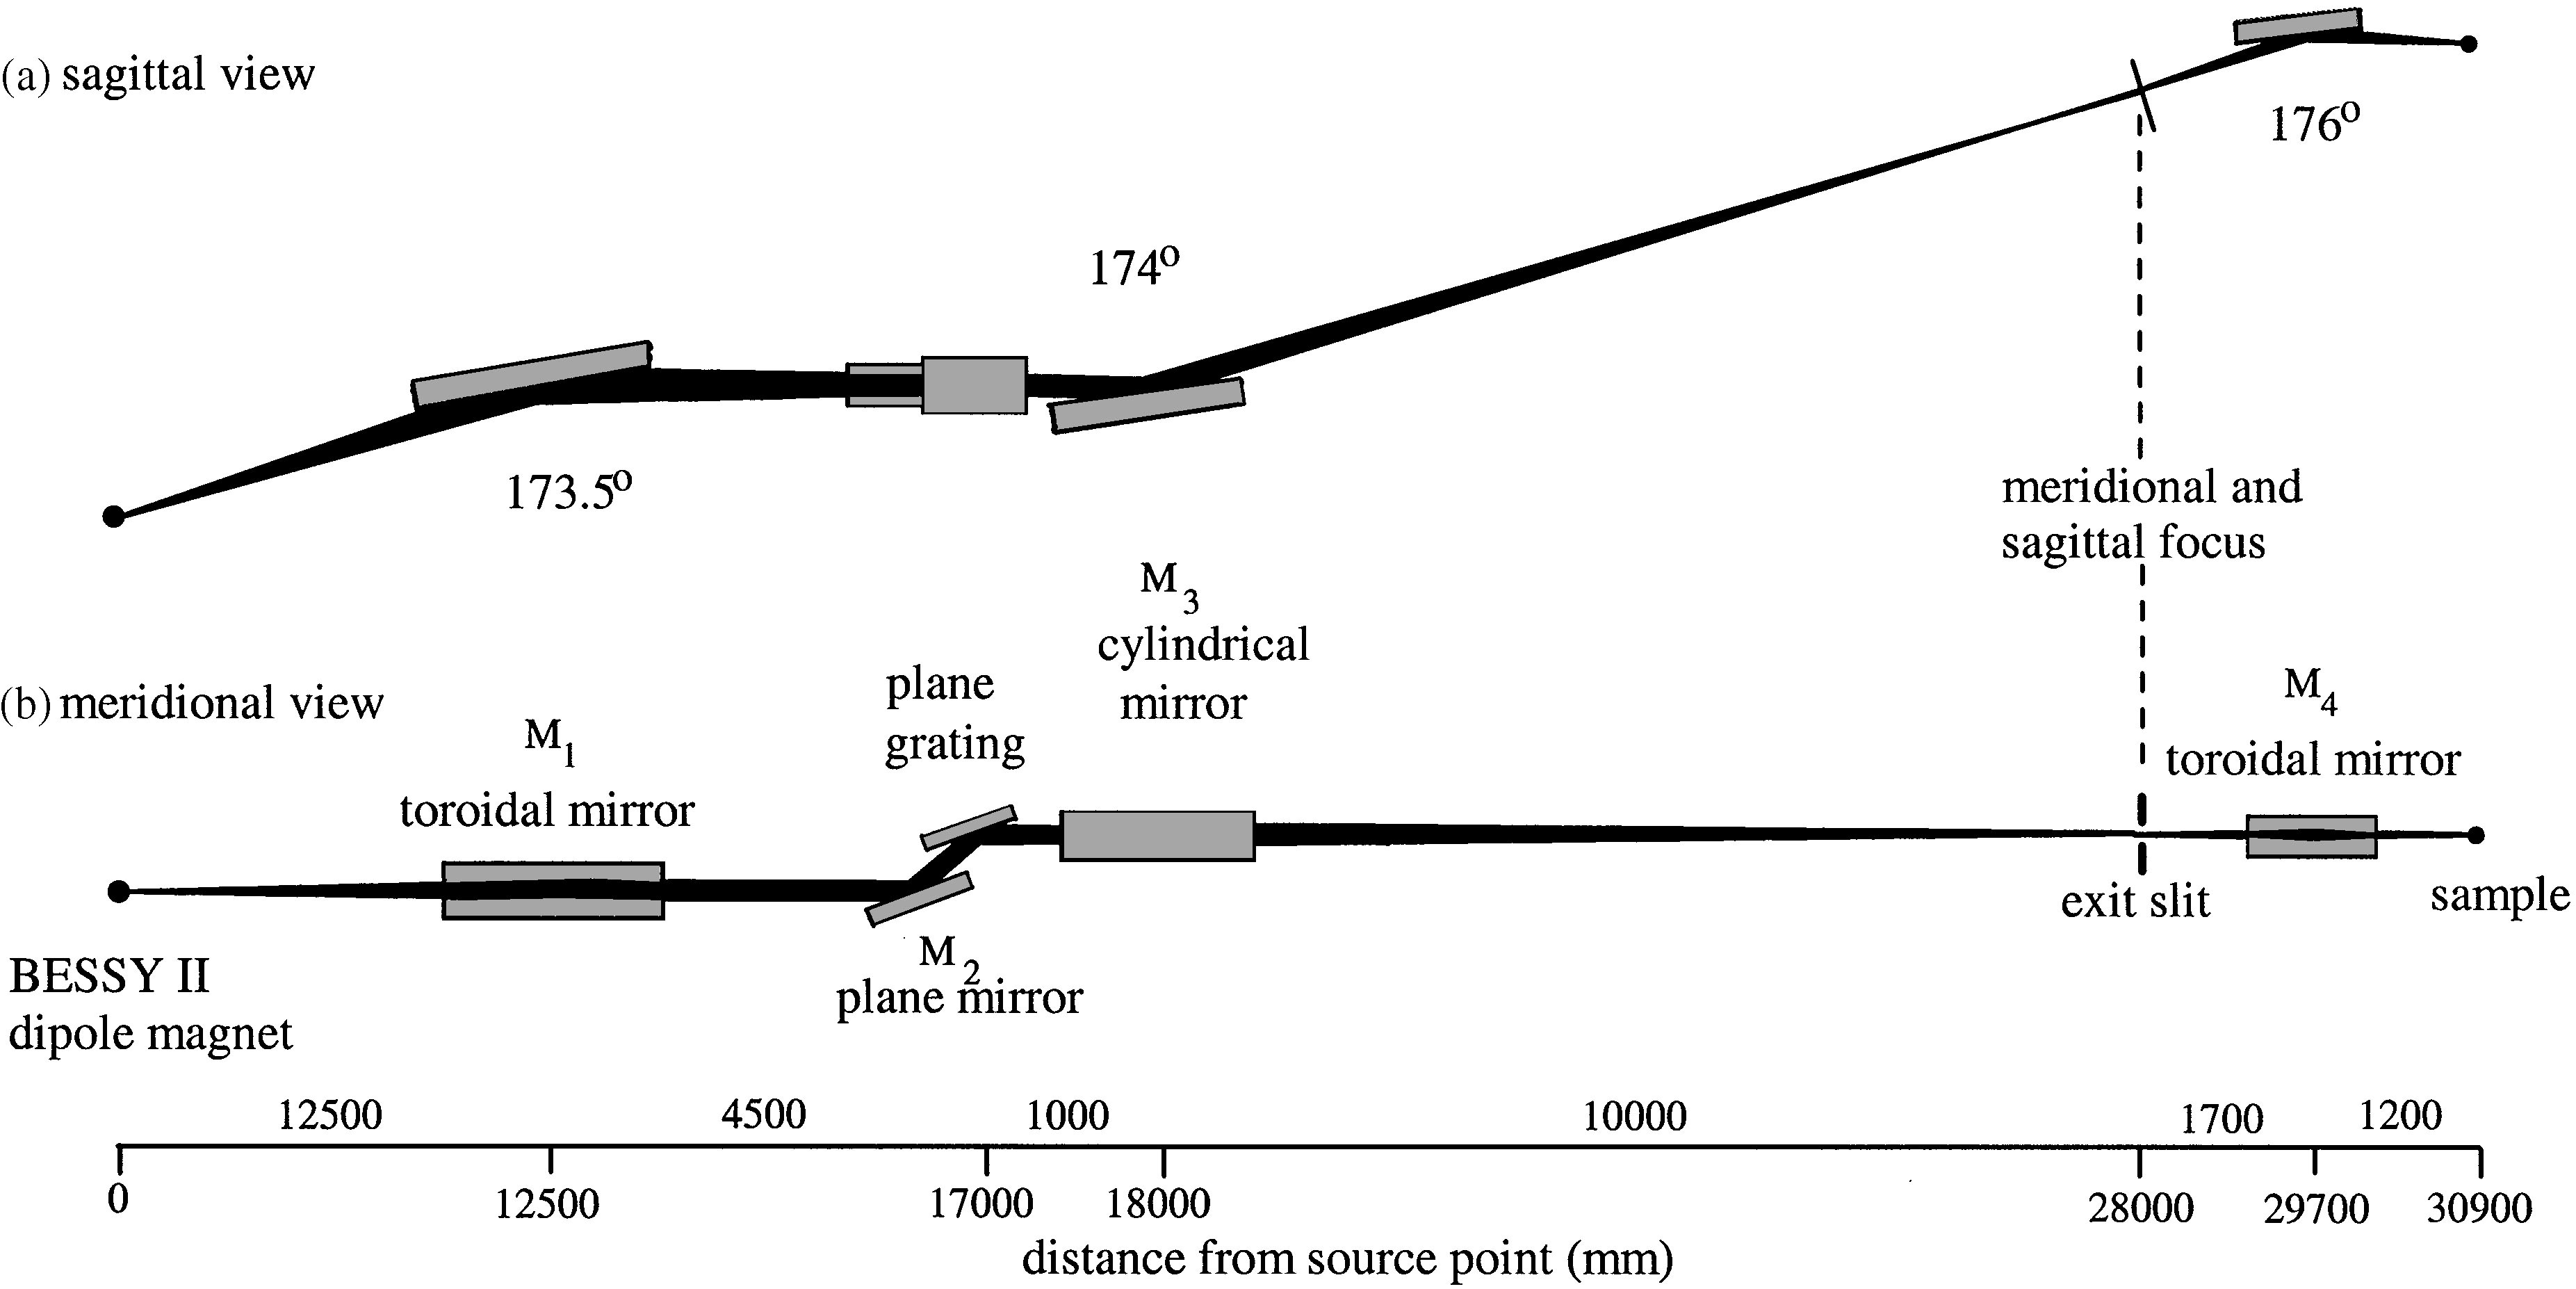 Optical layout of the GELEM dipole Beamline. [Gorovikov et al., Nucl. Instrum. Methods Phys. Res. A: Accel. Spectrom. Detect. Assoc. Equip. 467–468 (2001) 565-568]